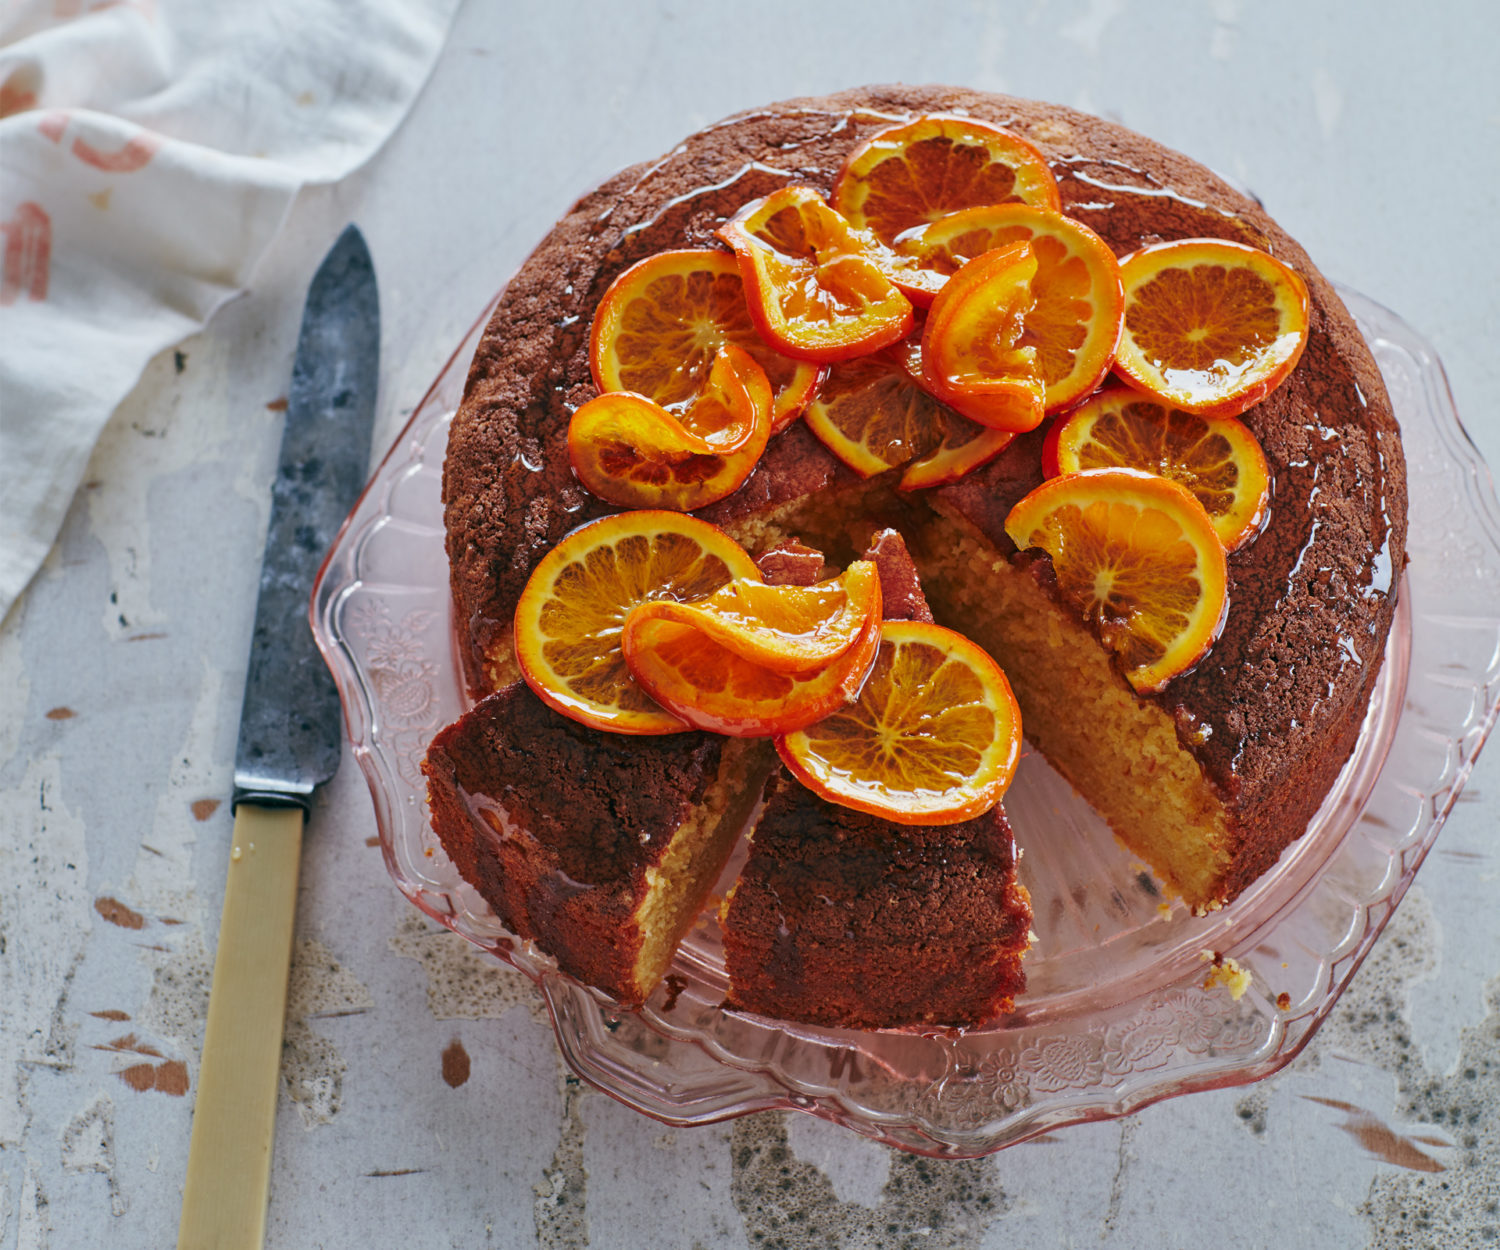 Clementine and almond cake recipe - BBC Food